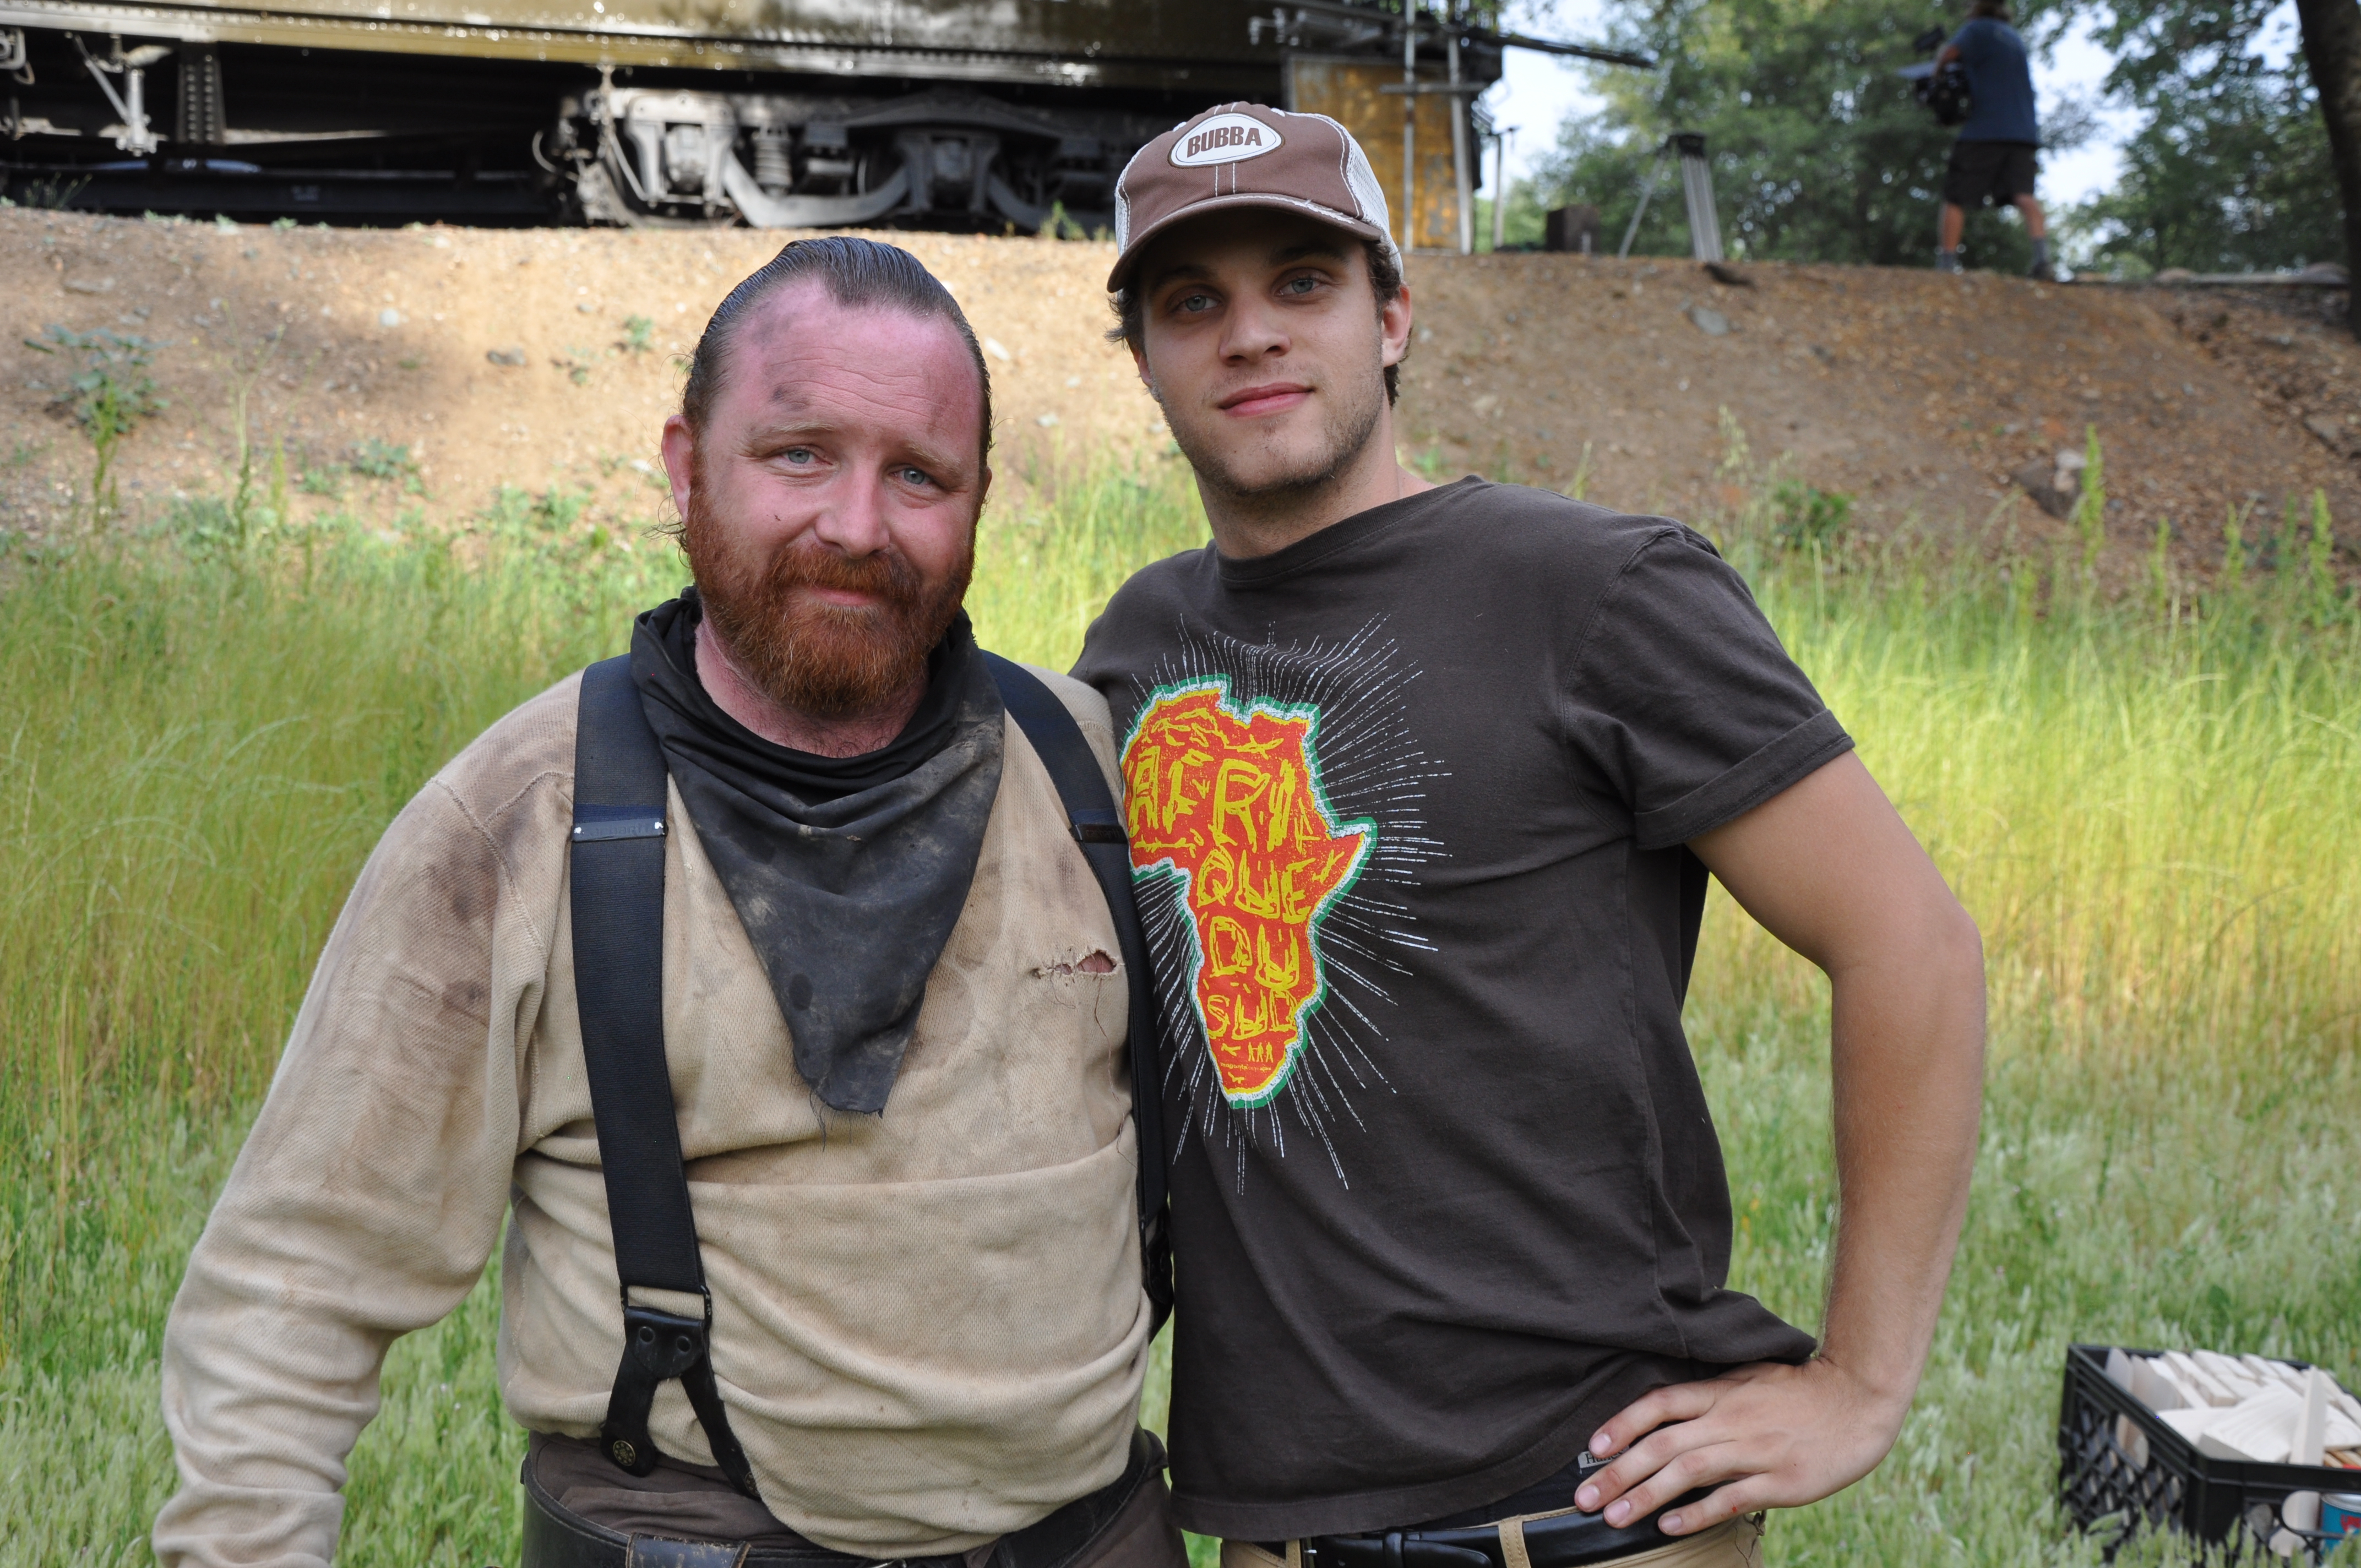 on set filming, ROUNDHOUSE. actor Travis James Campbell and Director/Producer/Screenwriter